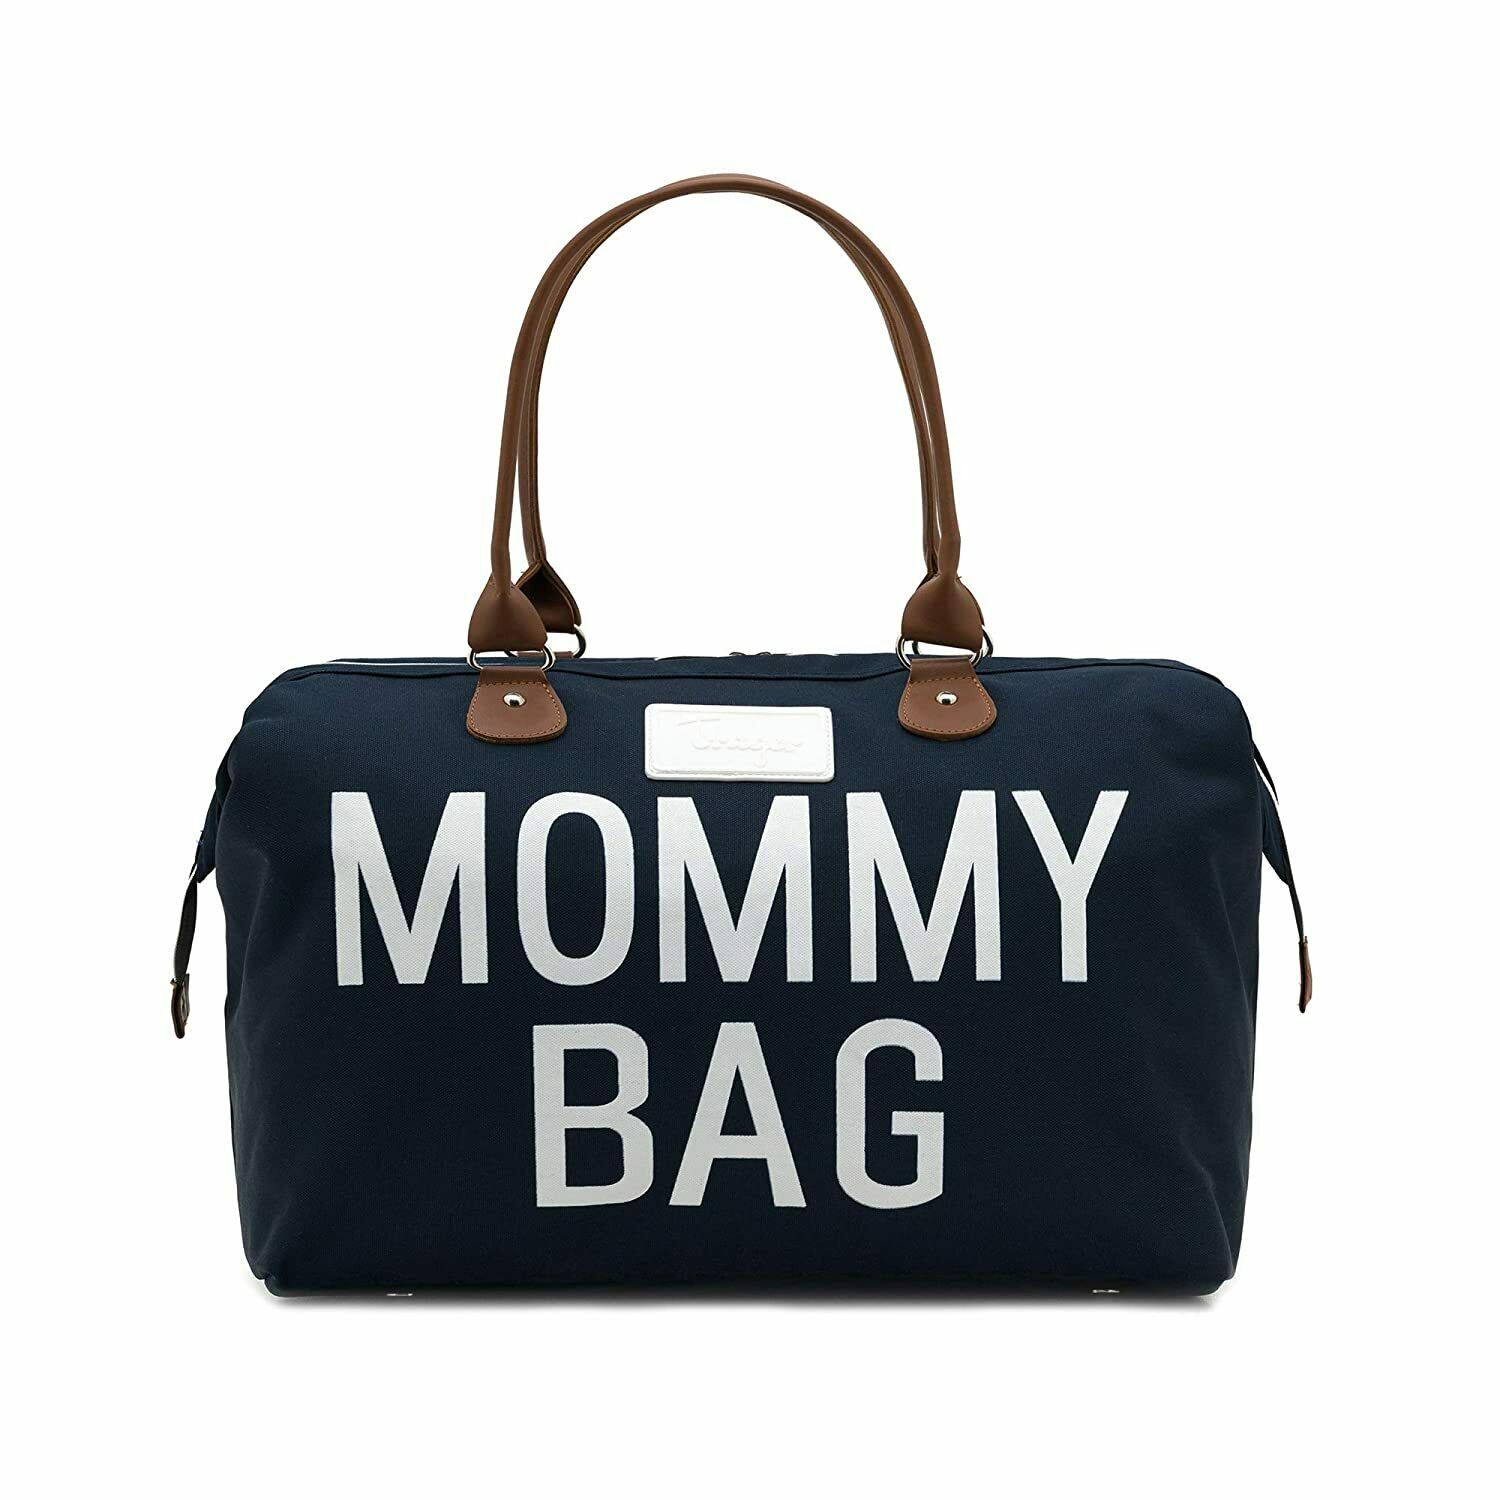 Mommy Bag Tote Maternity Baby Diaper Bag